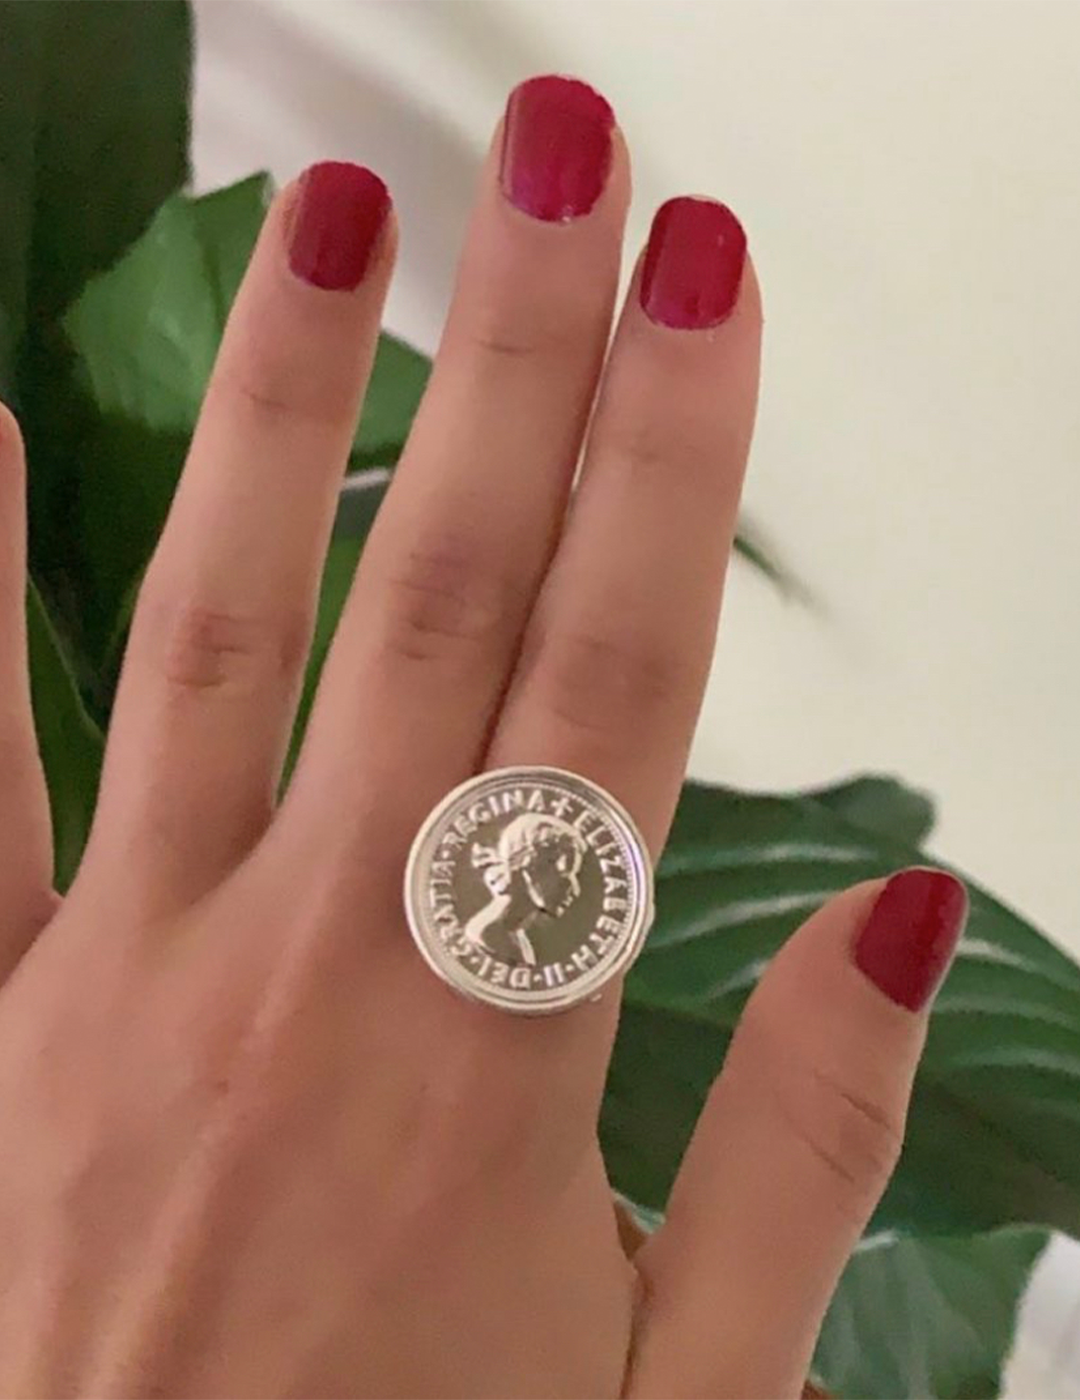 Classic Coin Ring